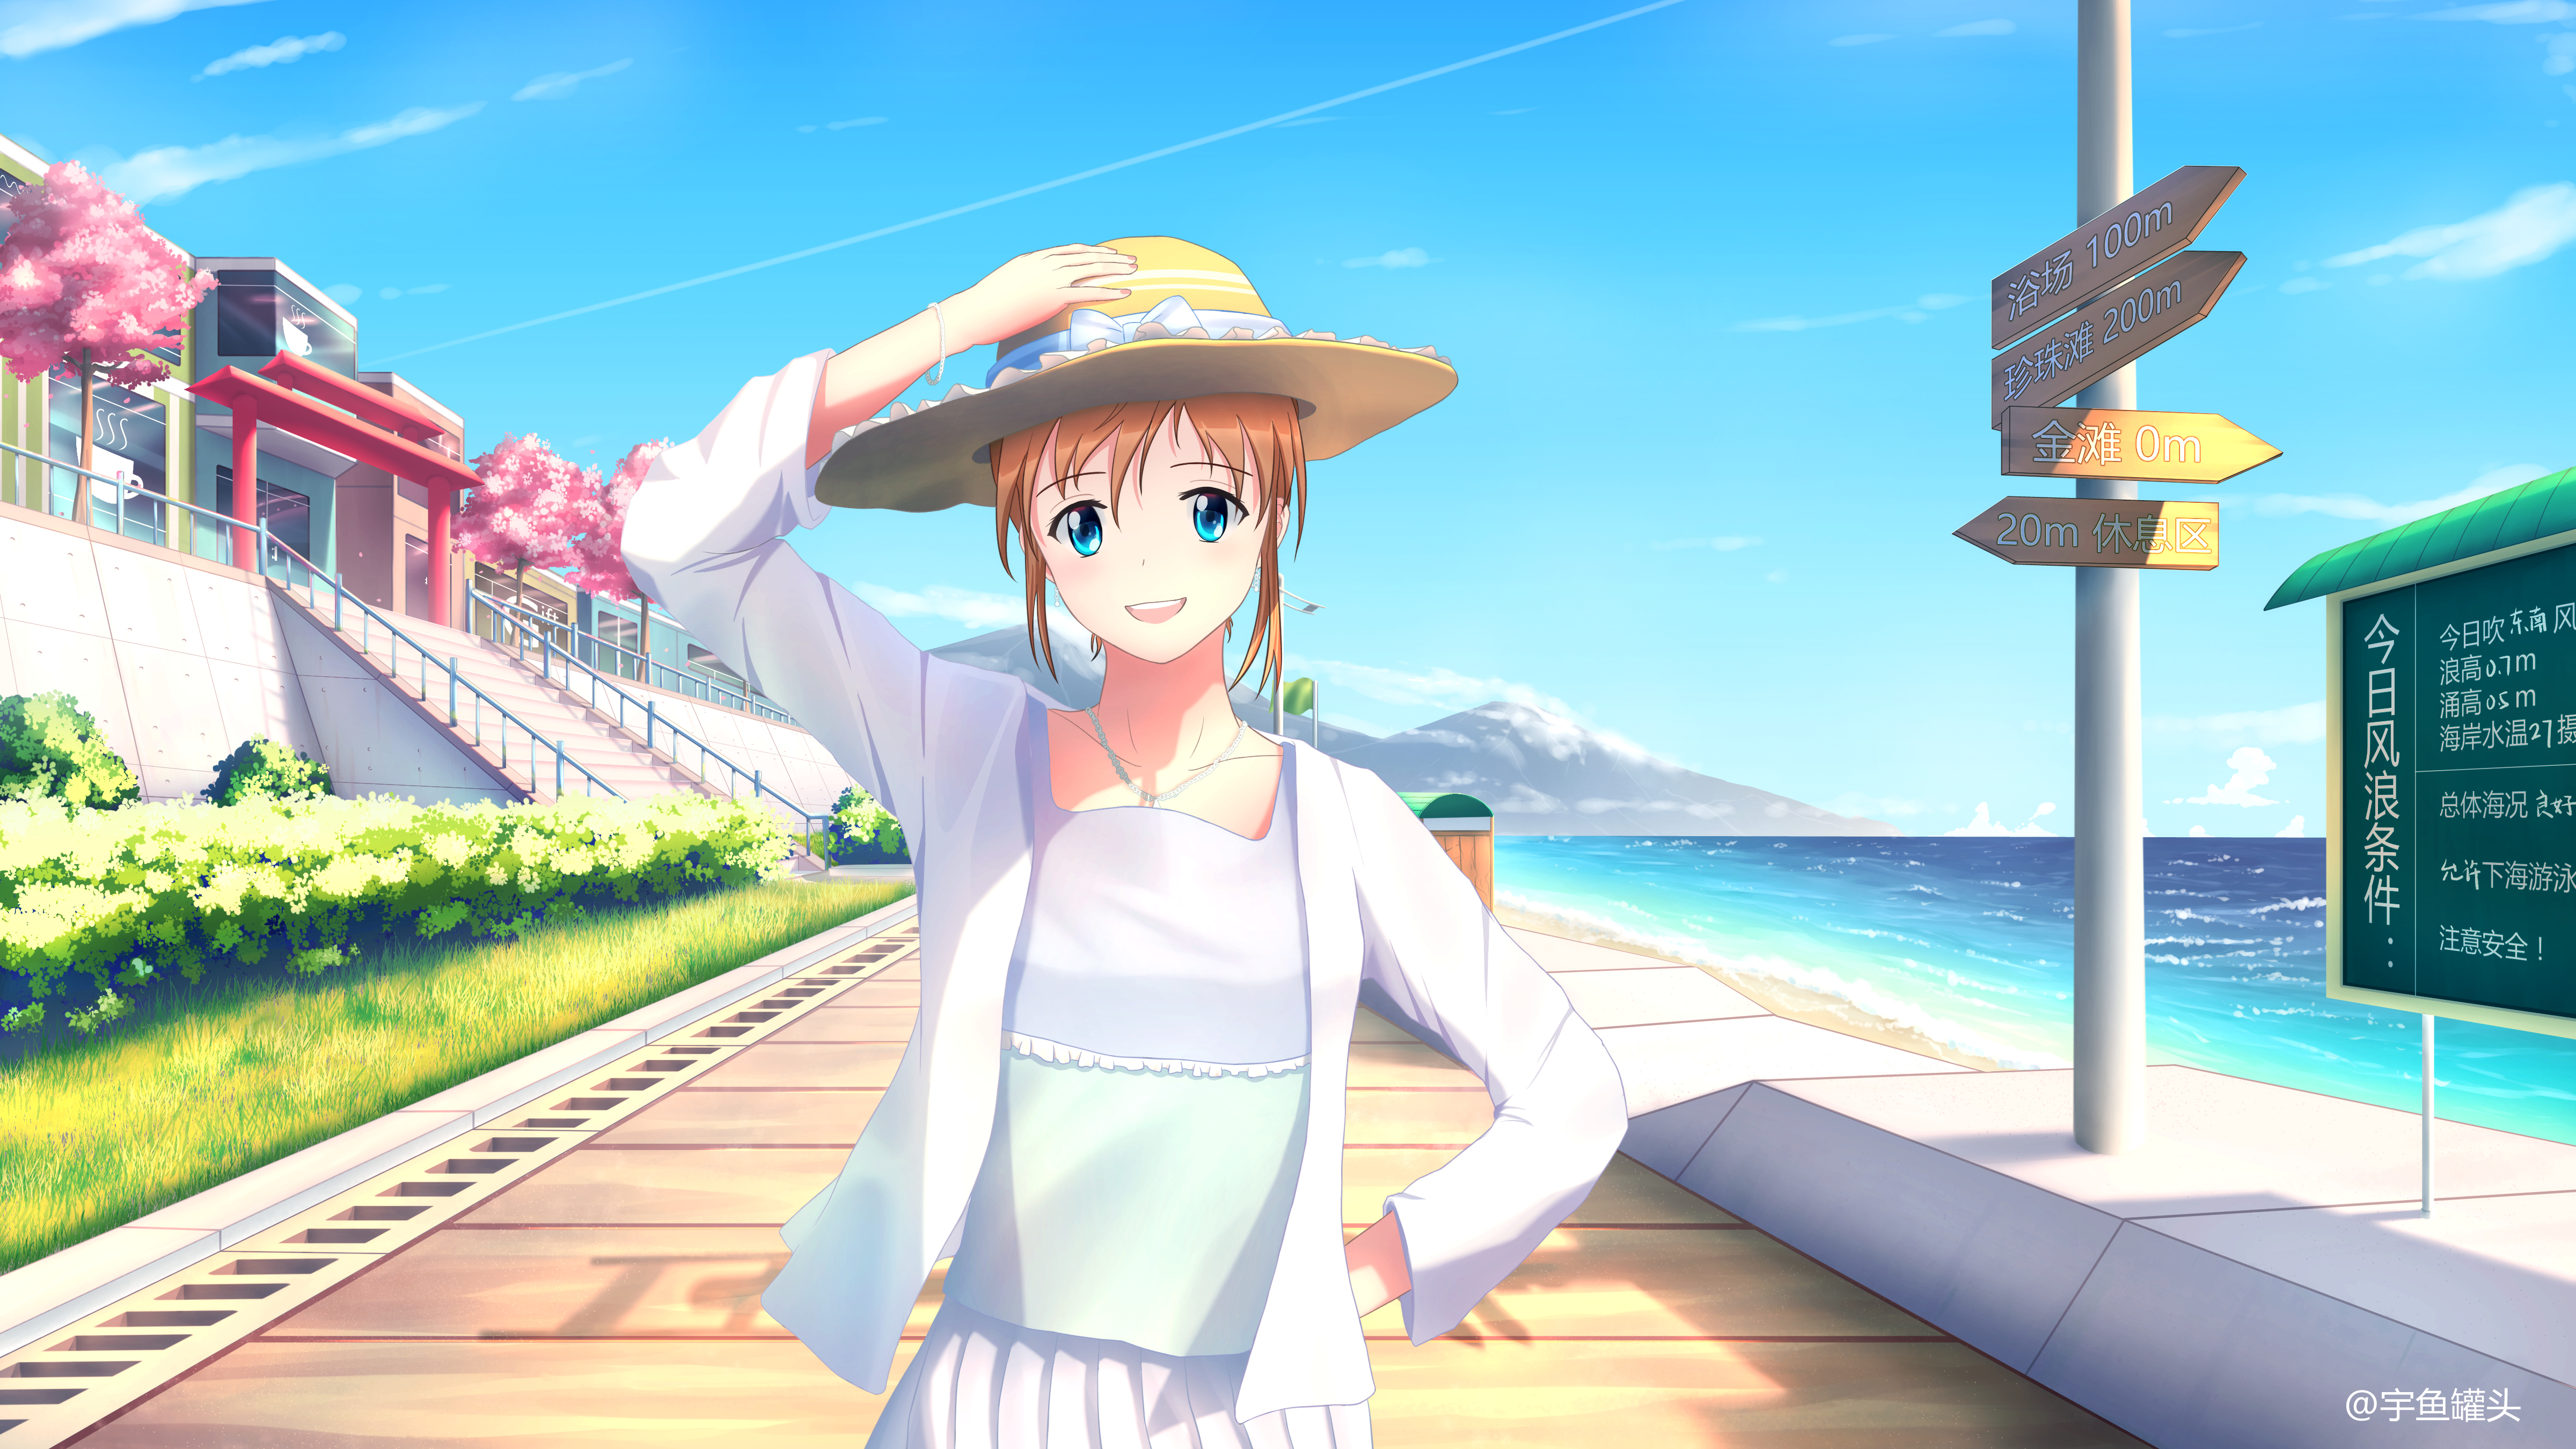 Anime Girl In Sunny Weather Wallpapers